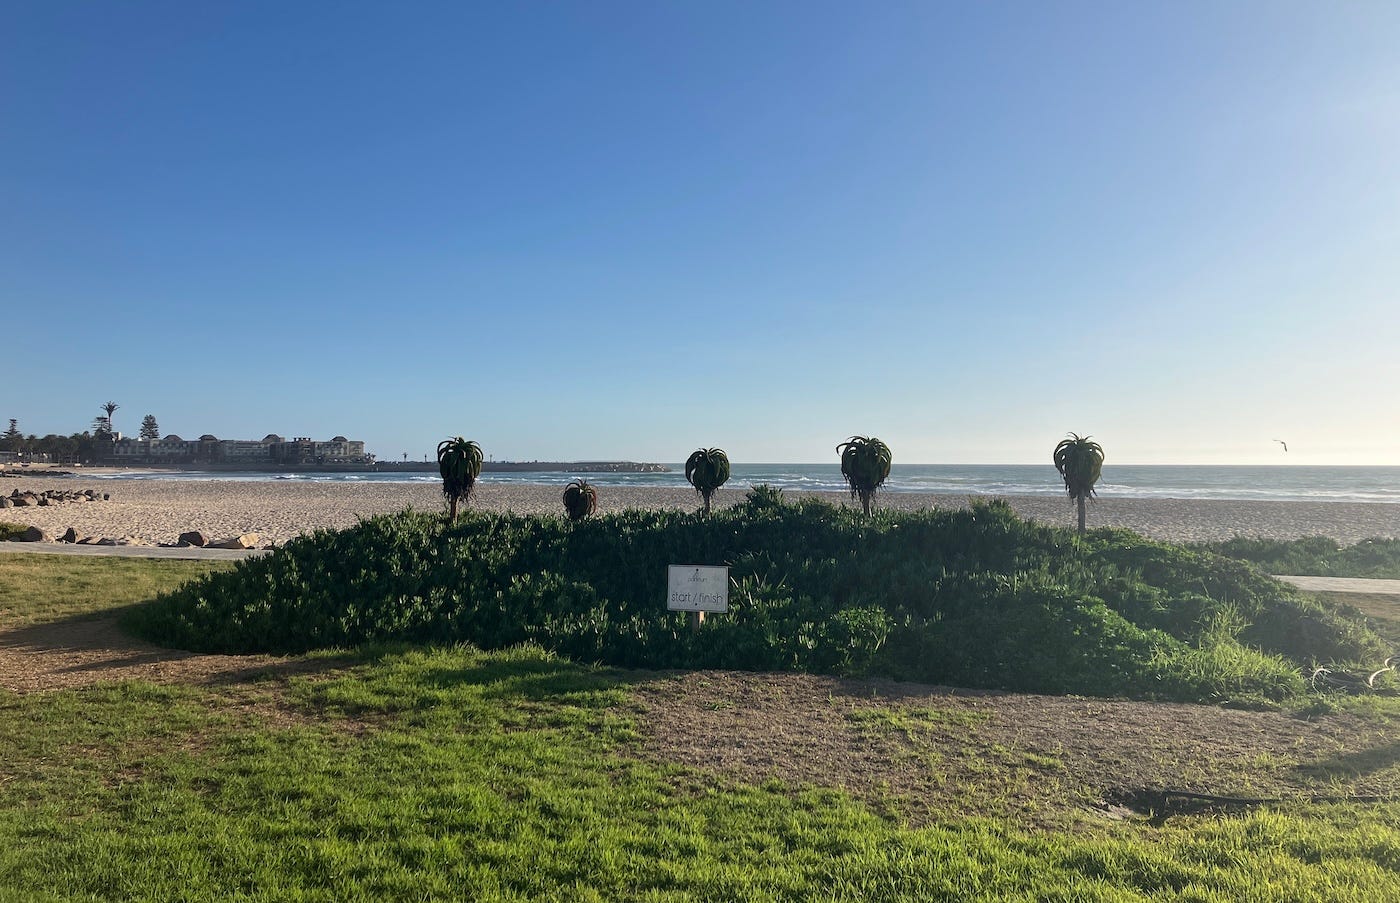 A hillock on grass by the beach has a permanent parkrun start/finish sign